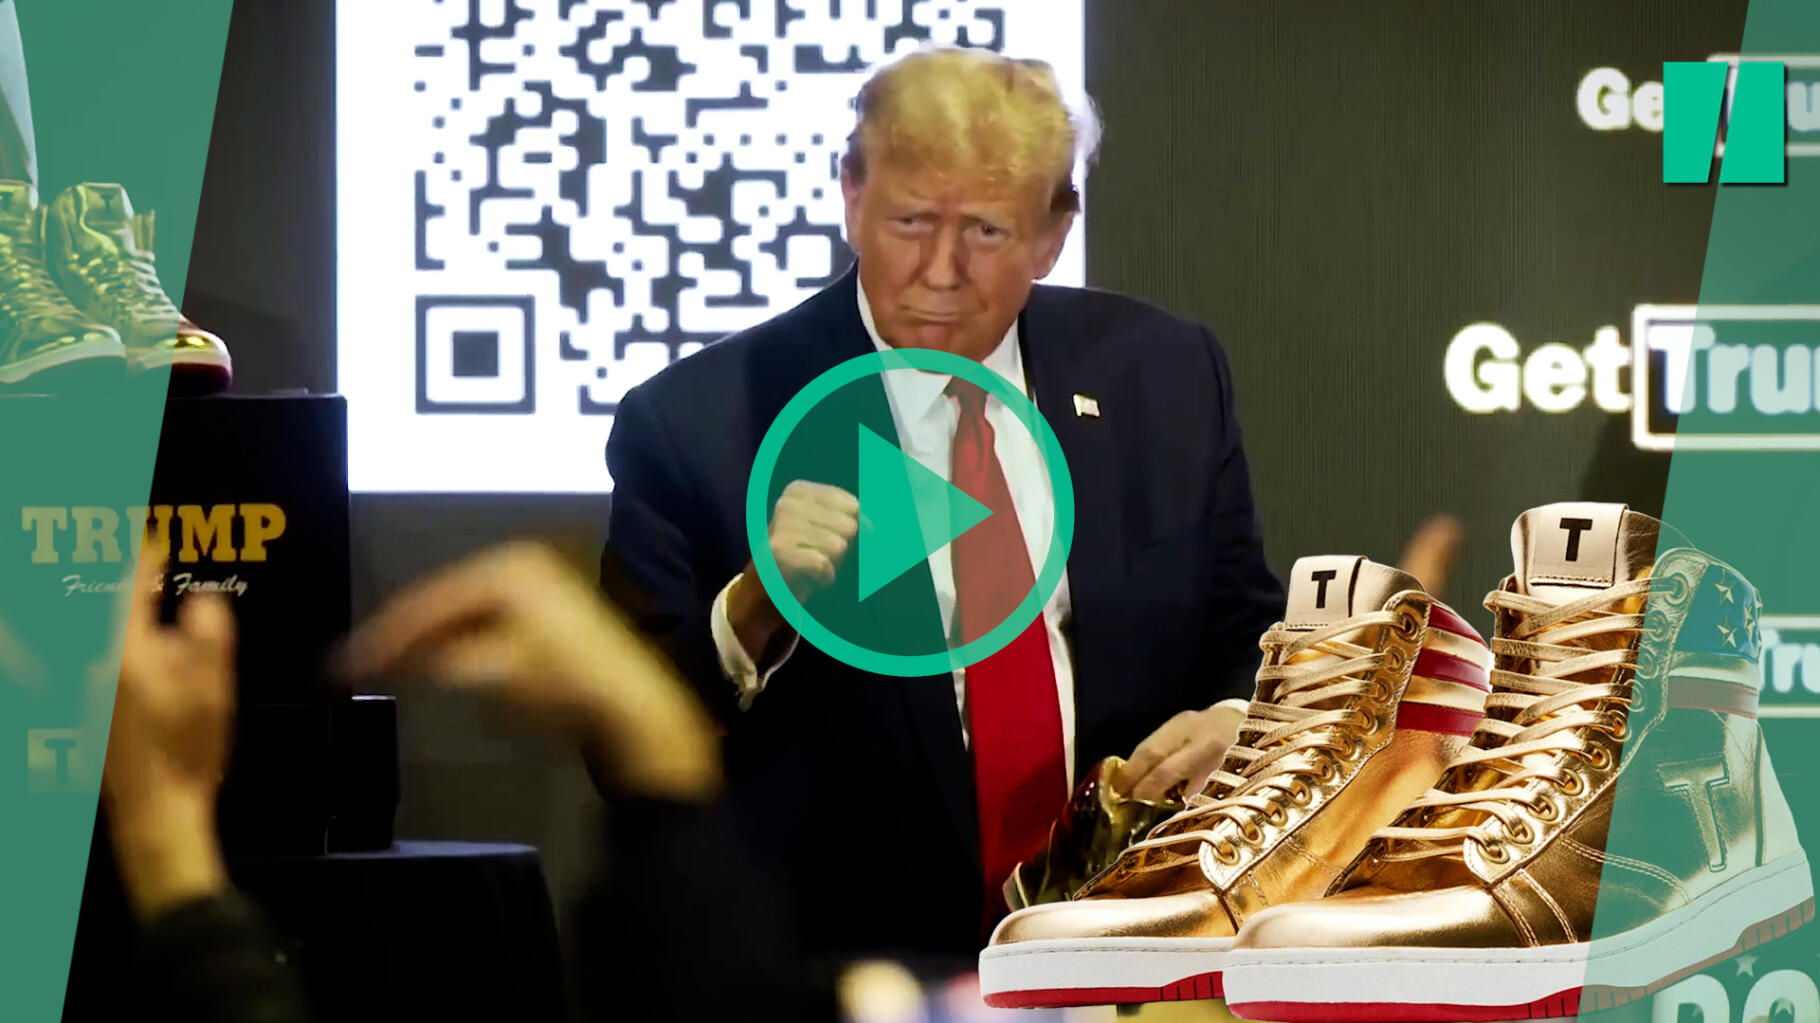 Trump launched his line of gold sneakers, and the Biden camp has found the perfect answer